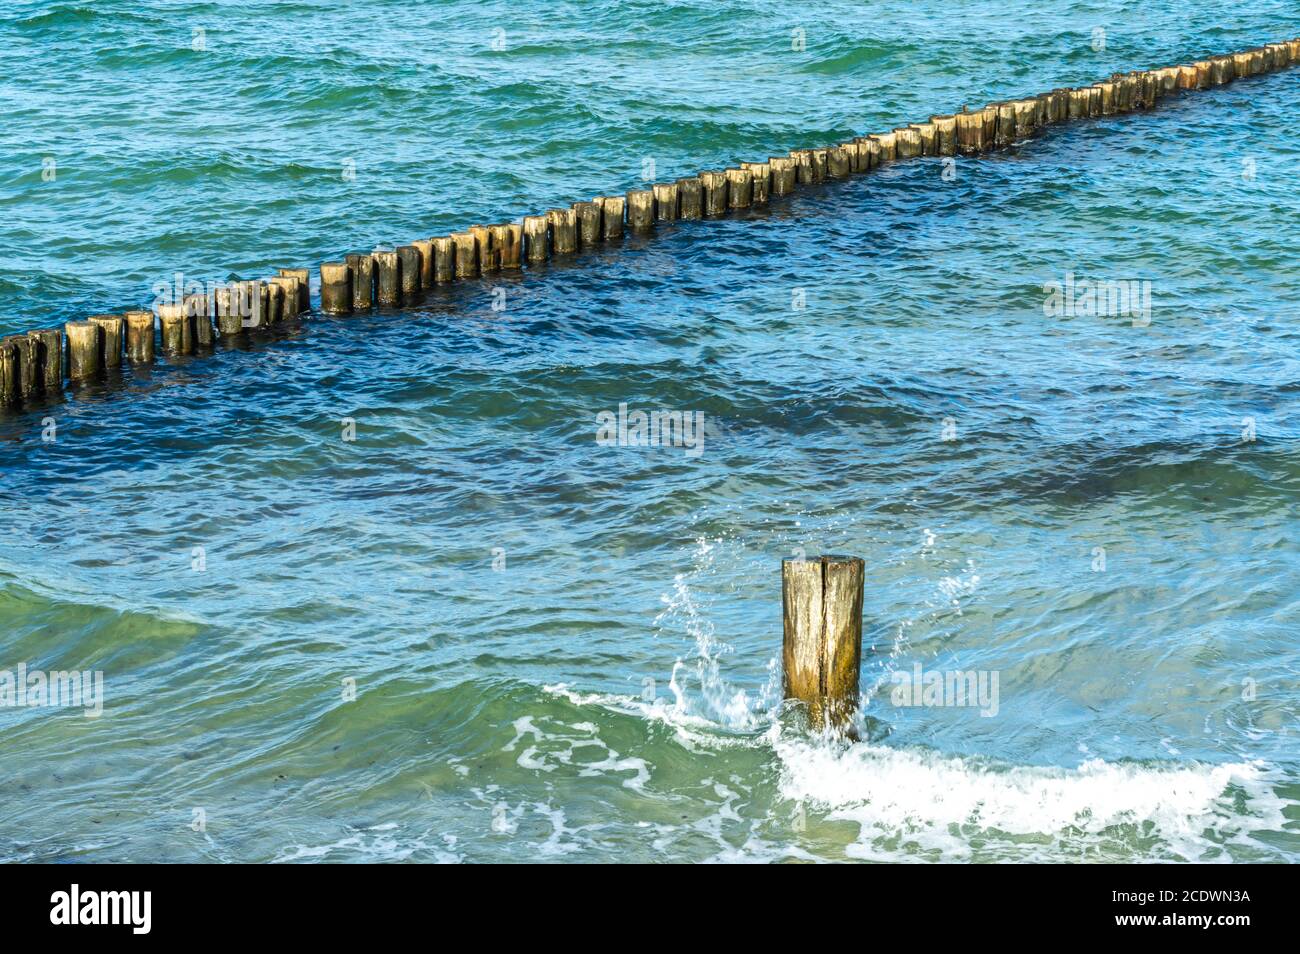 Waves at the seaside of the Eastsea Stock Photo